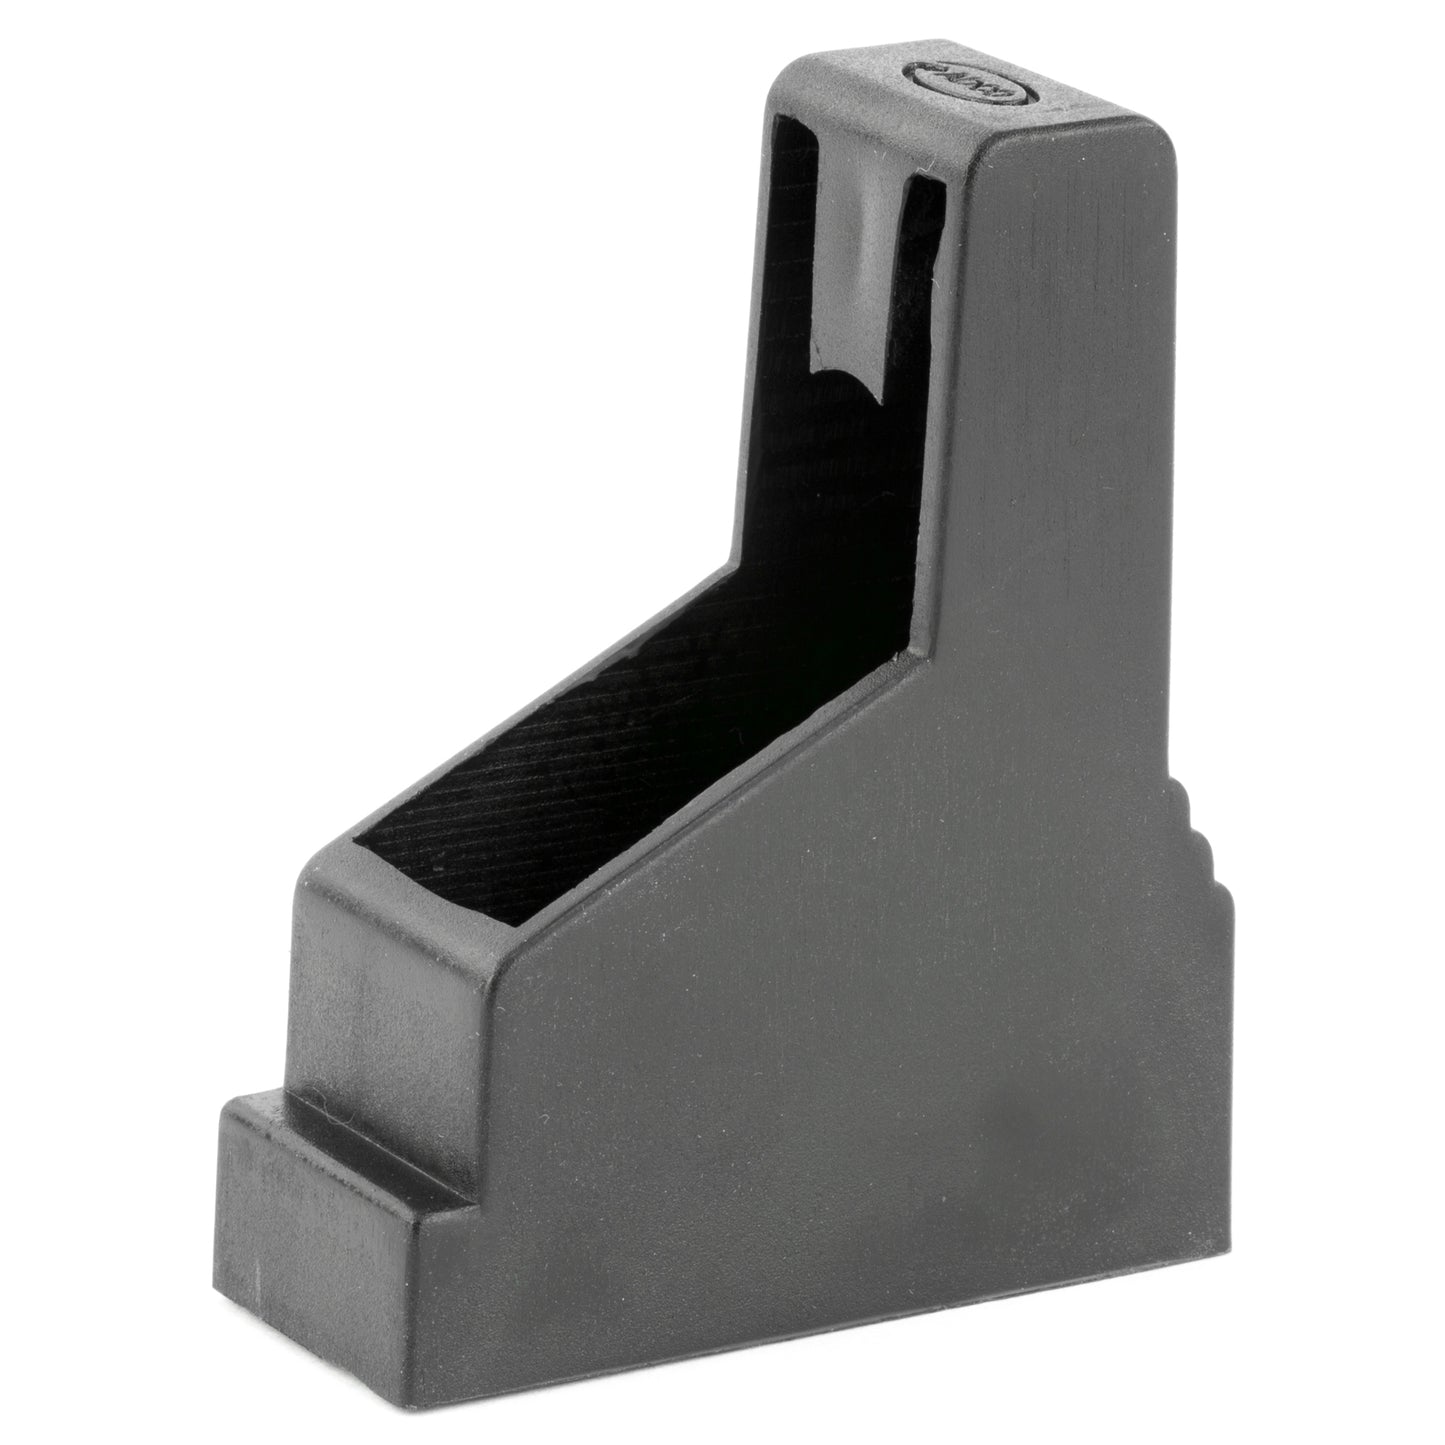 ADCO, Mag Loader, Fits Most 9MM-45ACP Single Stack Magazines, Fits 1911, S&W Shield, Sig 220/938, Springfield XDS, Black